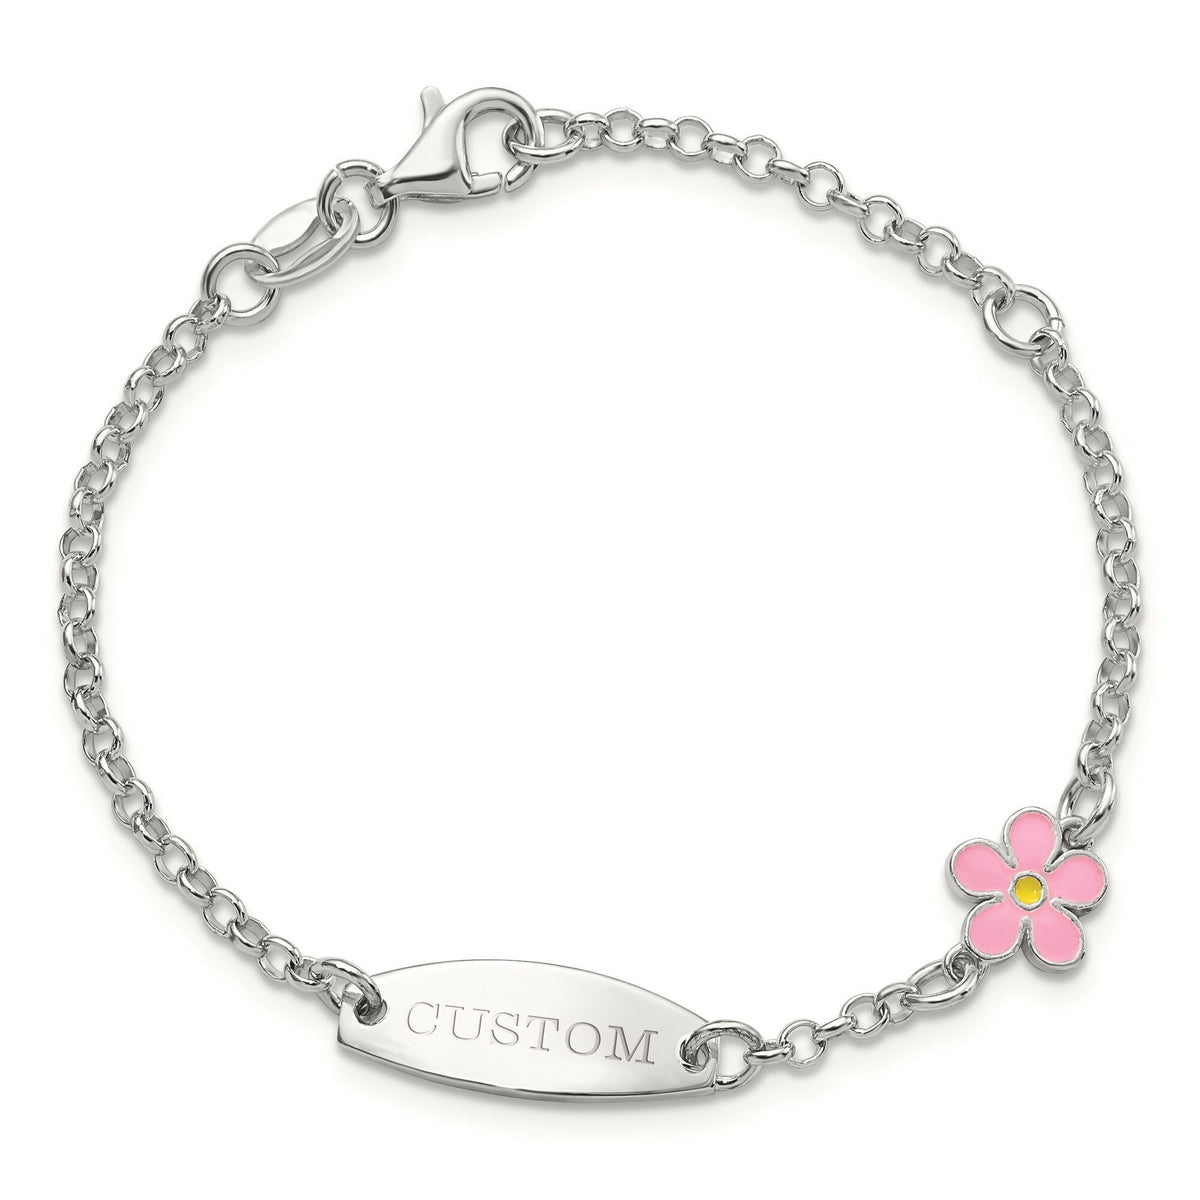 Children's Sterling Silver Personalized ID Bracelet with Pink Flower 5 inches w/ 1inch Ext ( 6 Characters)  9 months Old - 3 Years Old